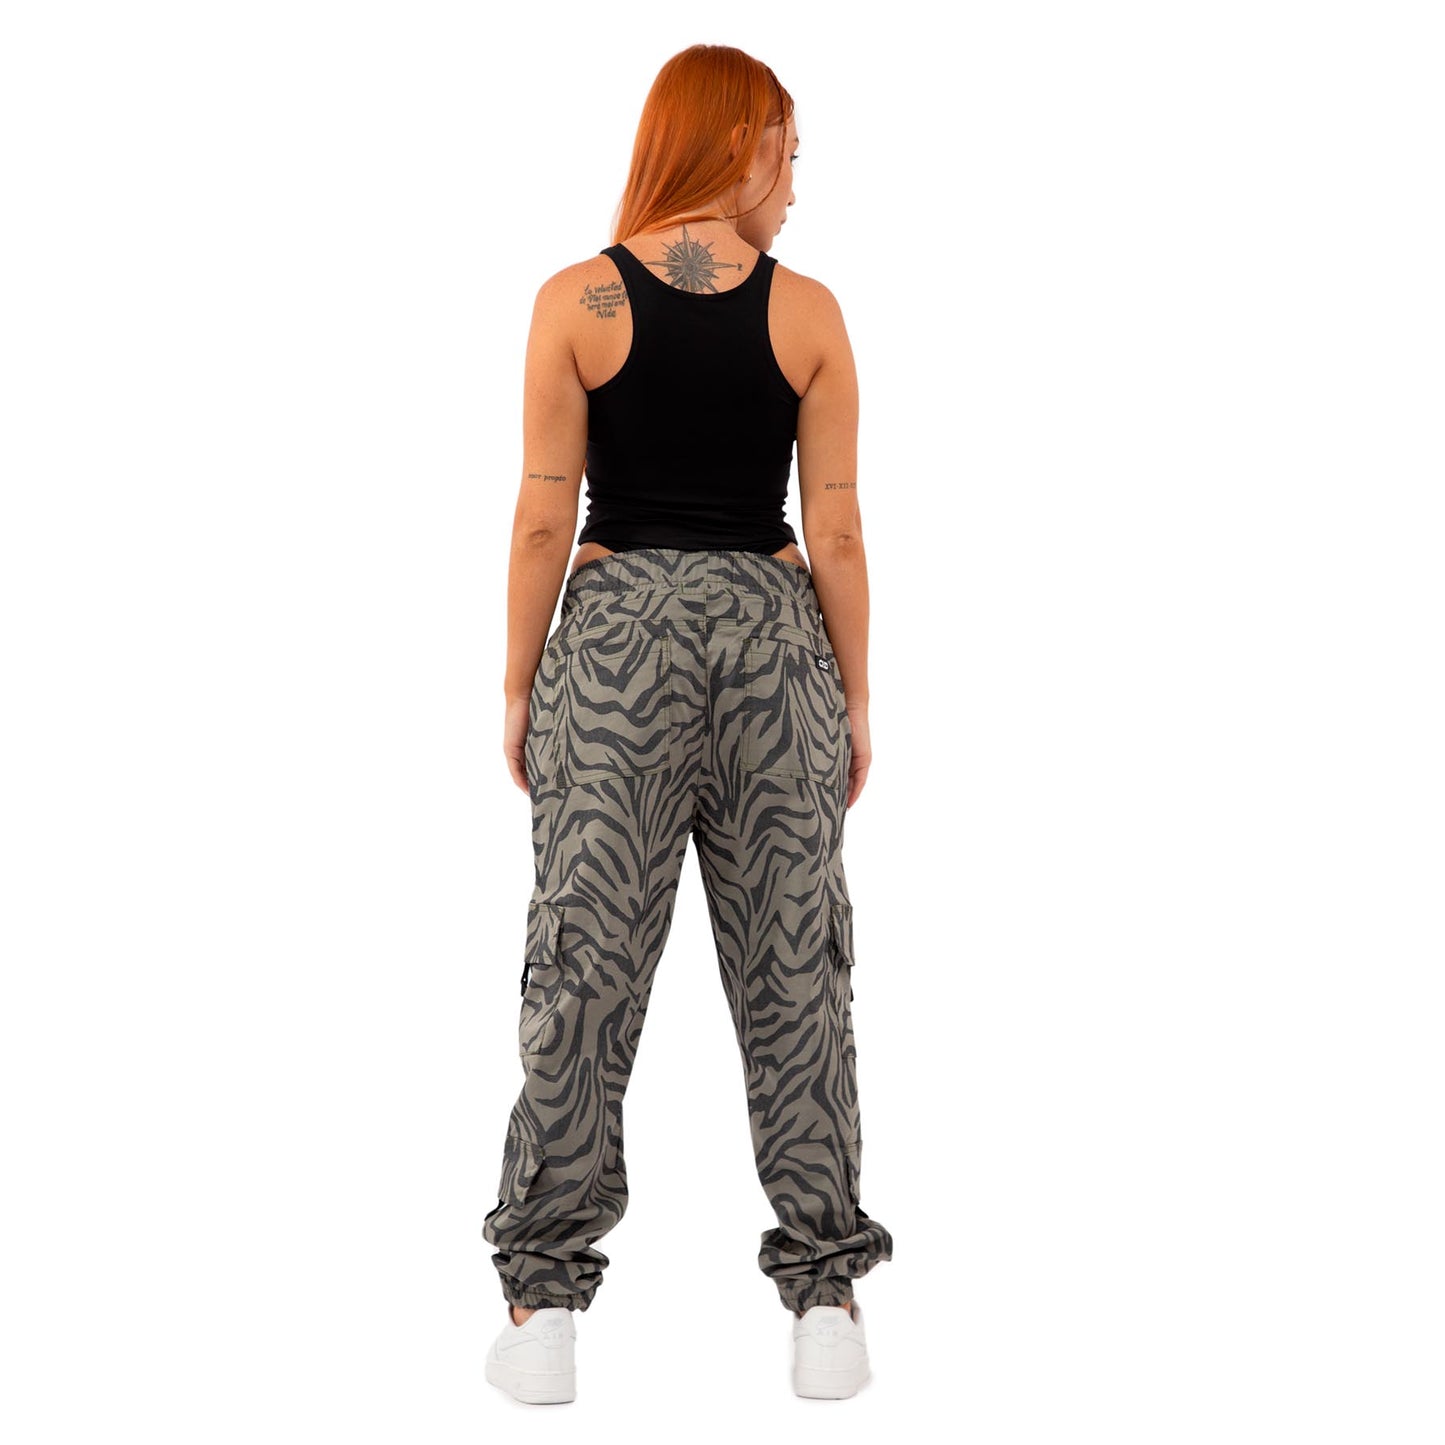 Wild zebra cammo Double Cargo Pants Mujer color: Green Gray 8121